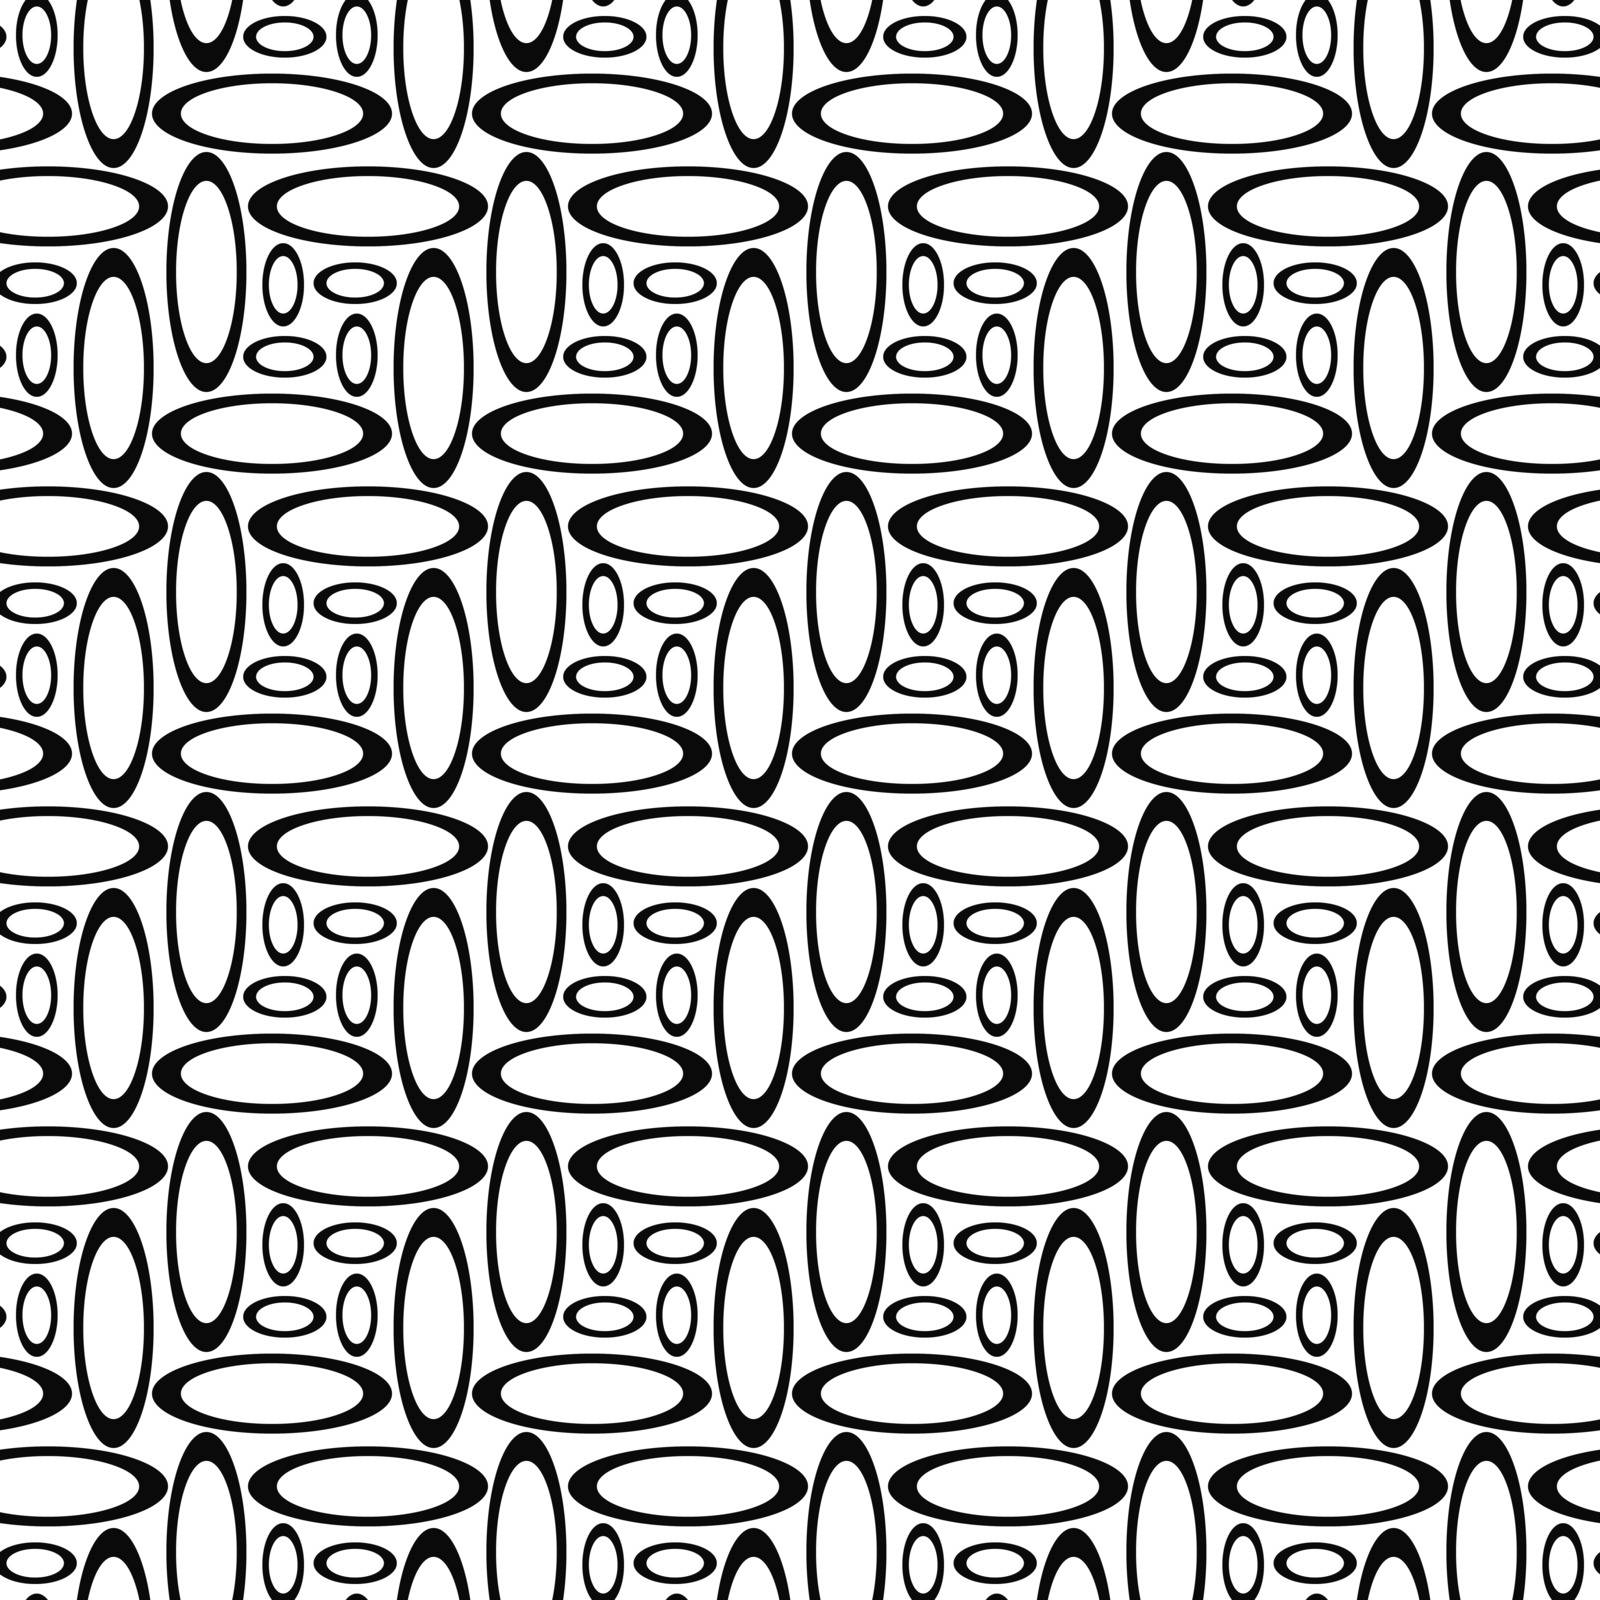 Monochrome abstract repeating ellipse pattern design background